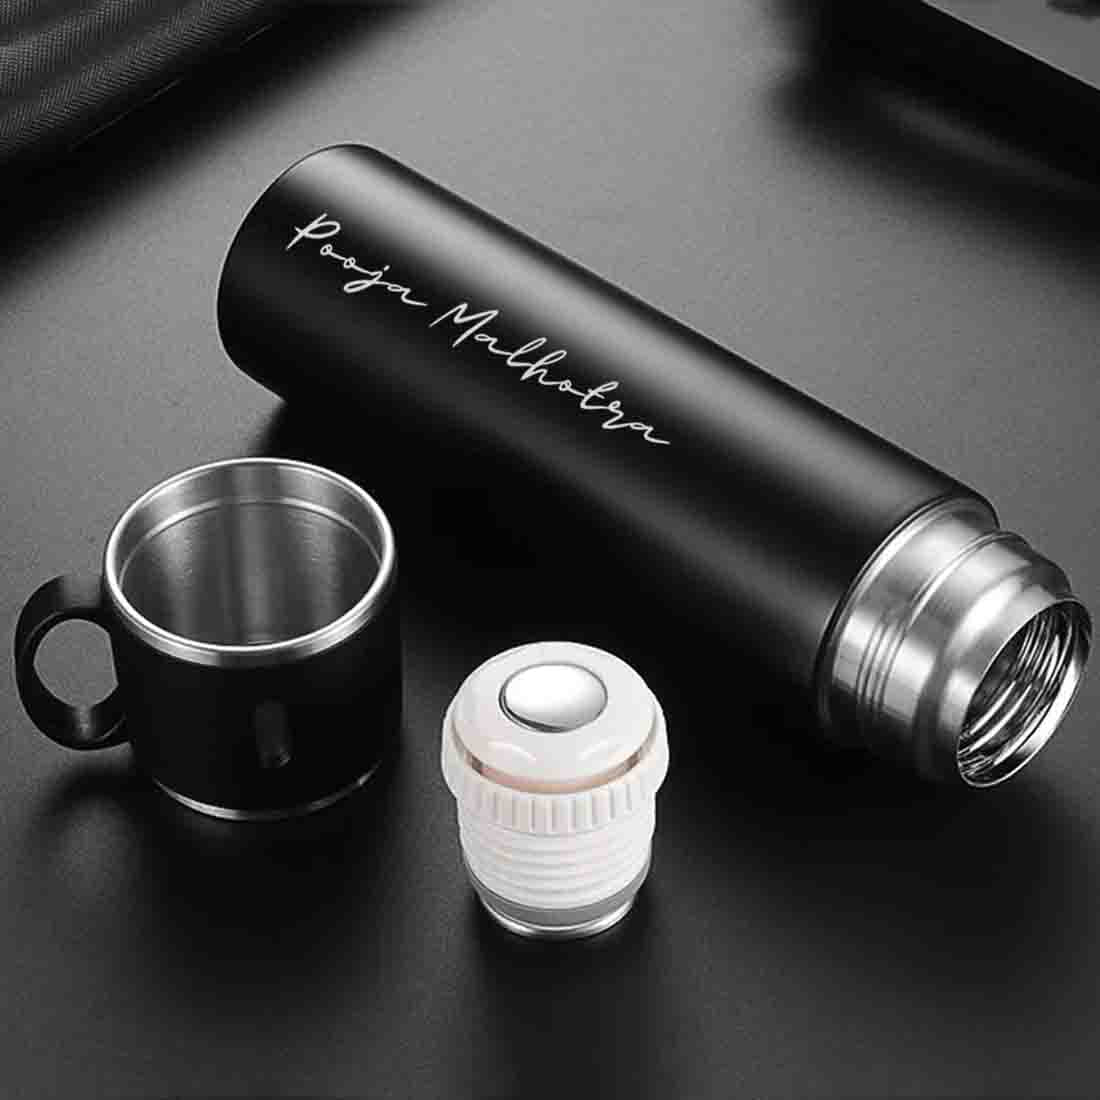 Custom Thermos With Cup Lid 3 Cups Gift Box Set for Travel Outdoor Camping - Add Name